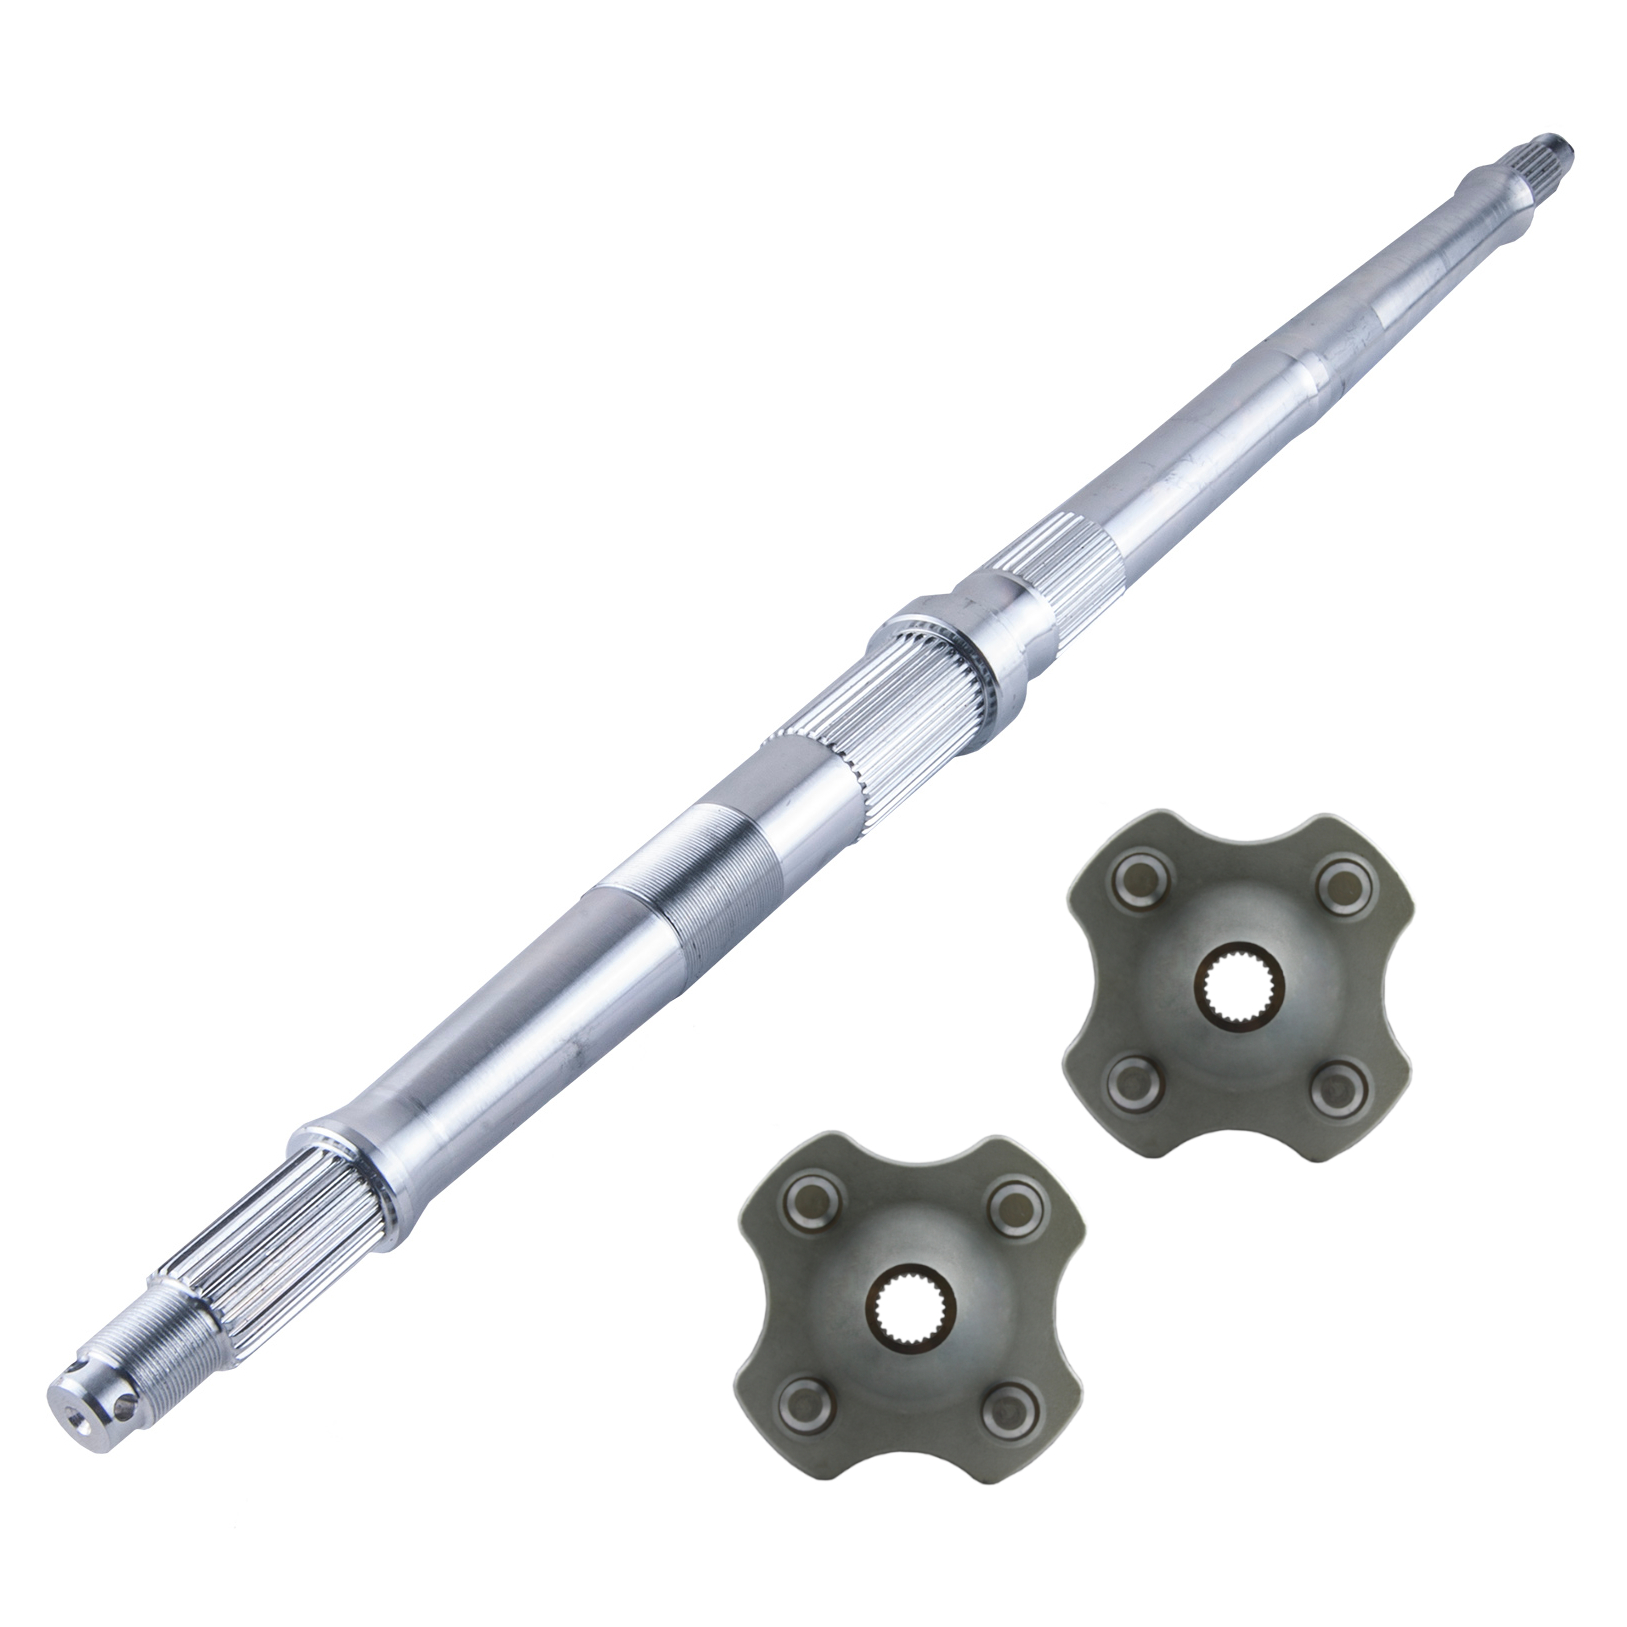 East Lake Axle Rear wheel axle compatible with Honda TRX 250 Fourtrax Recon 1997 1998 1999 2000 2001 2002-2016 